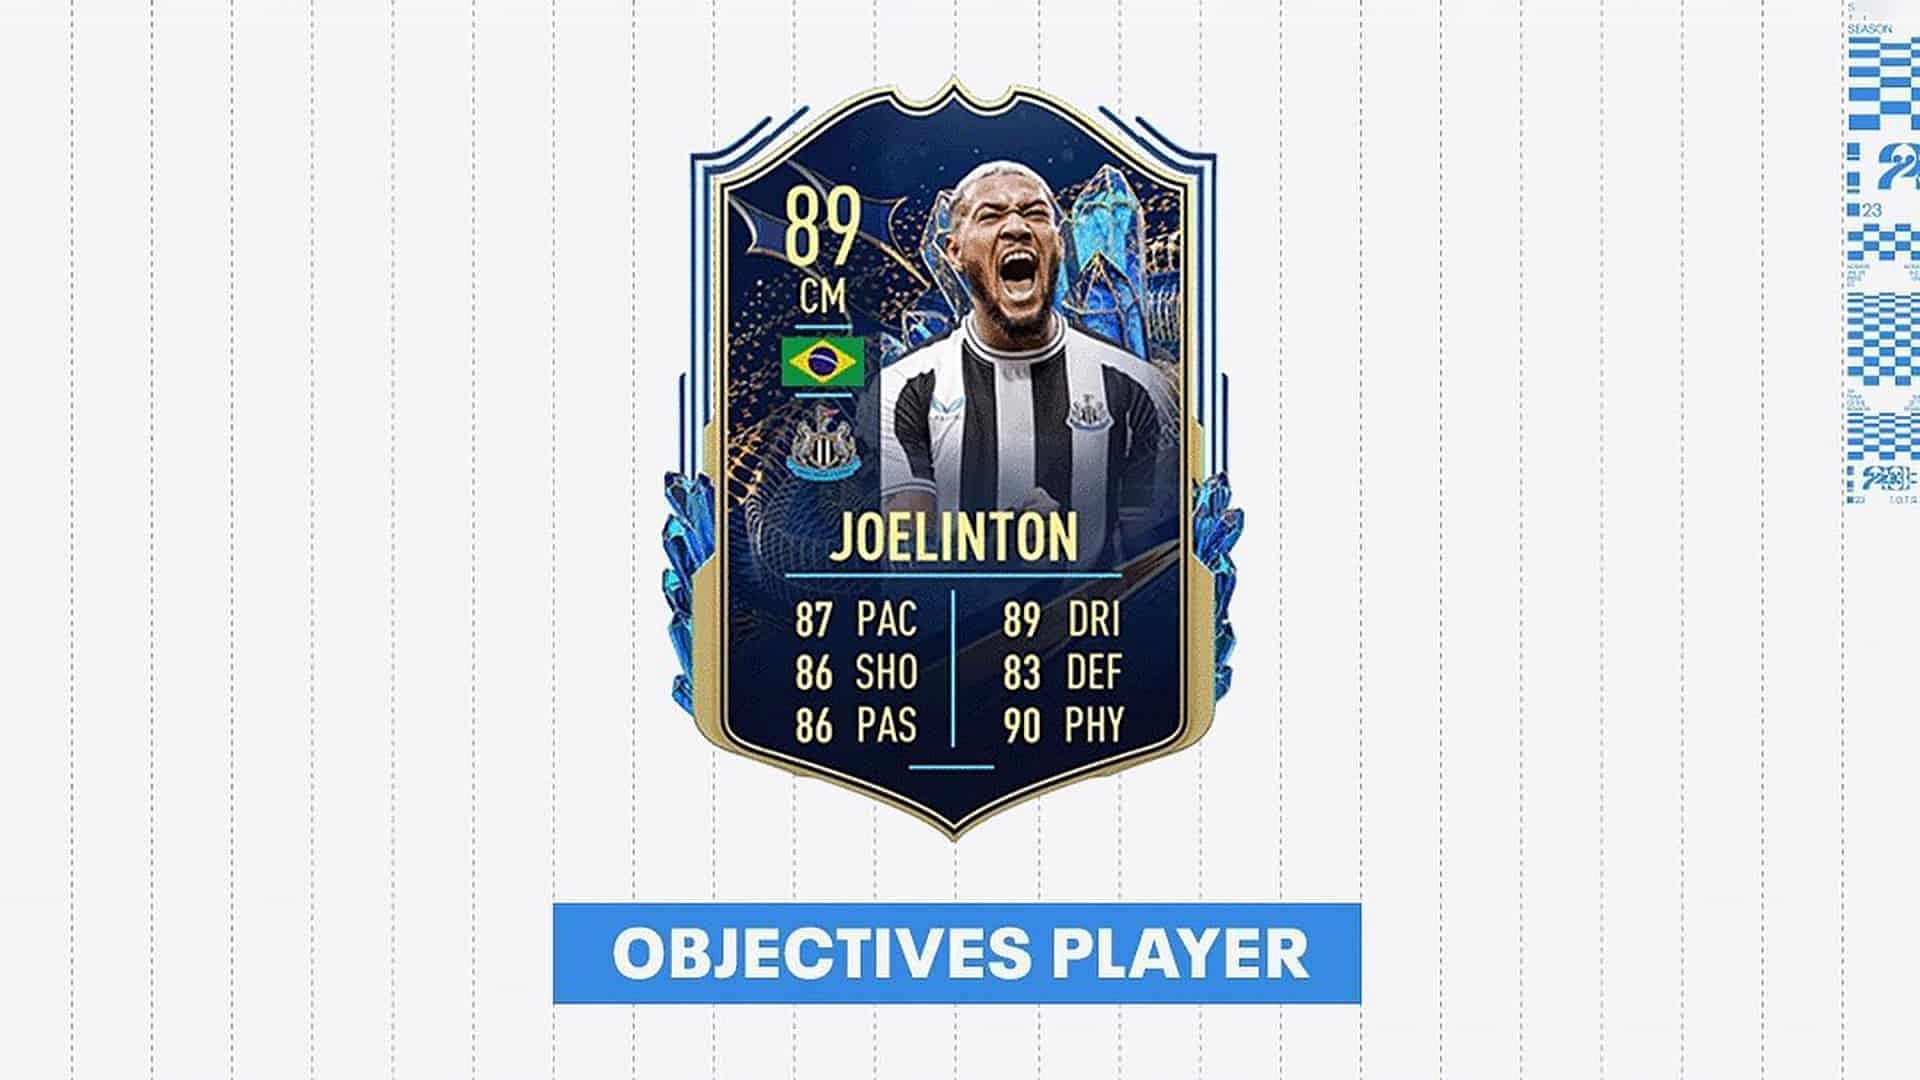 FIFA 23 players can obtain a great card by completing the Joelinton TOTS objective (Image via EA Sports0